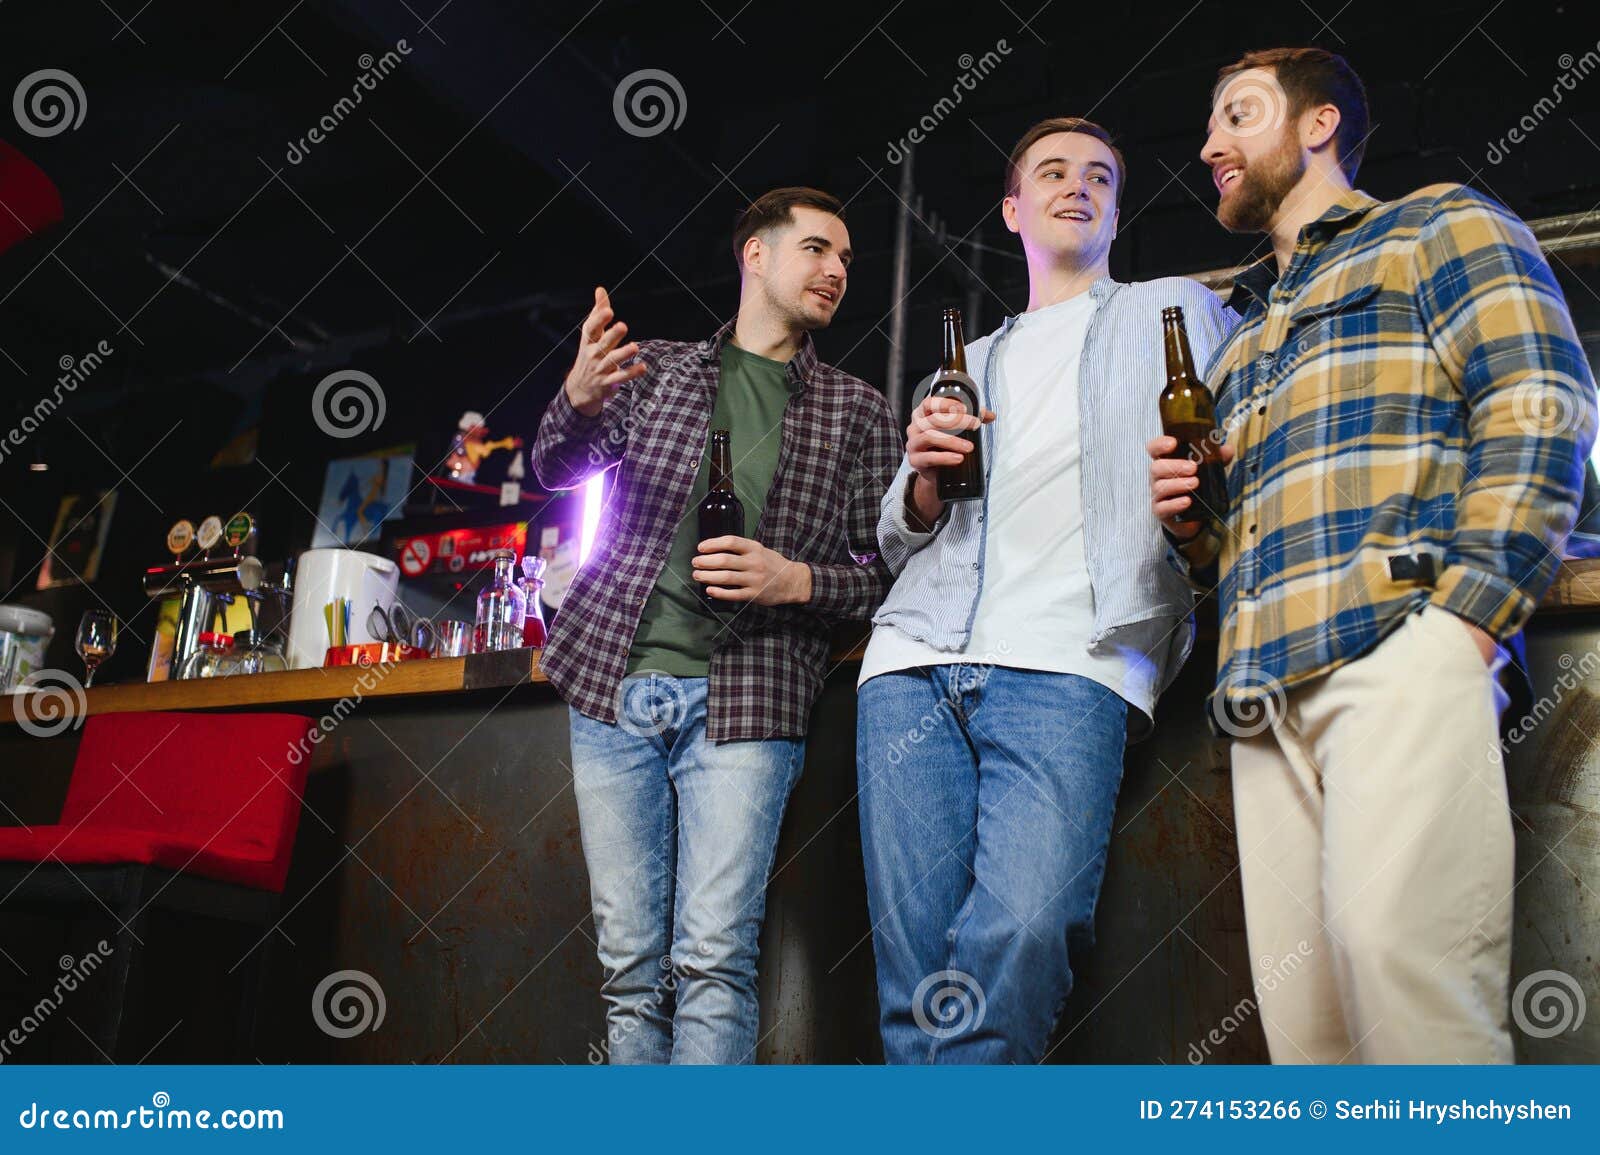 young men casual clothes talking laughing drinking sitting bar counter pub young men casual clothes 274153266